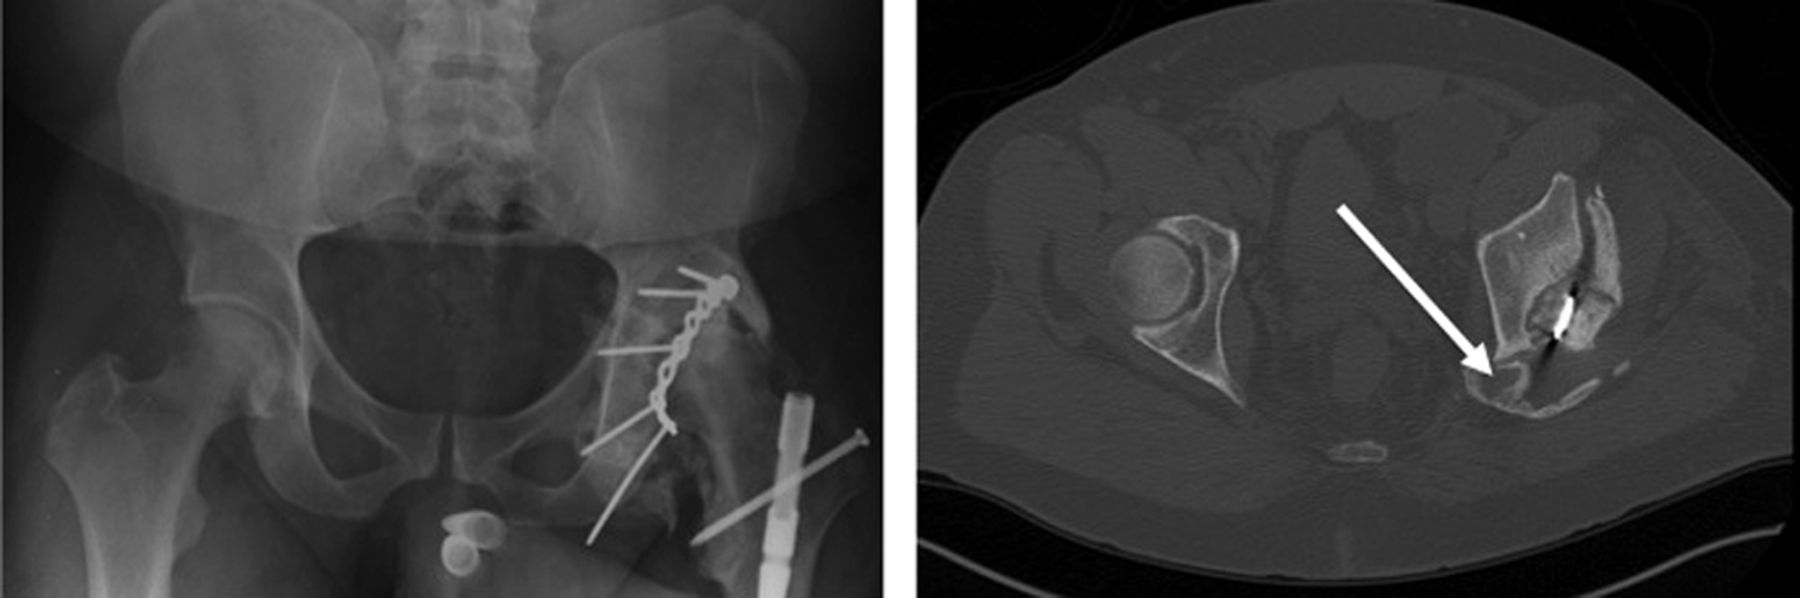 Fig. 3 
            A 37-year-old male patient sustained
a fracture of the left acetabulum and traumatic brain injury after
a high-speed automobile collision. The patient underwent open reduction
and internal fixation of the left acetabular fracture within four
days of the injury. Anteroposterior radiograph (left) and CT (right)
were taken six months after injury and show the sciatic nerve encased in
heterotopic bone (arrow). Advanced imaging was essential for diagnosis
and pre-operative planning for surgical resection.
          